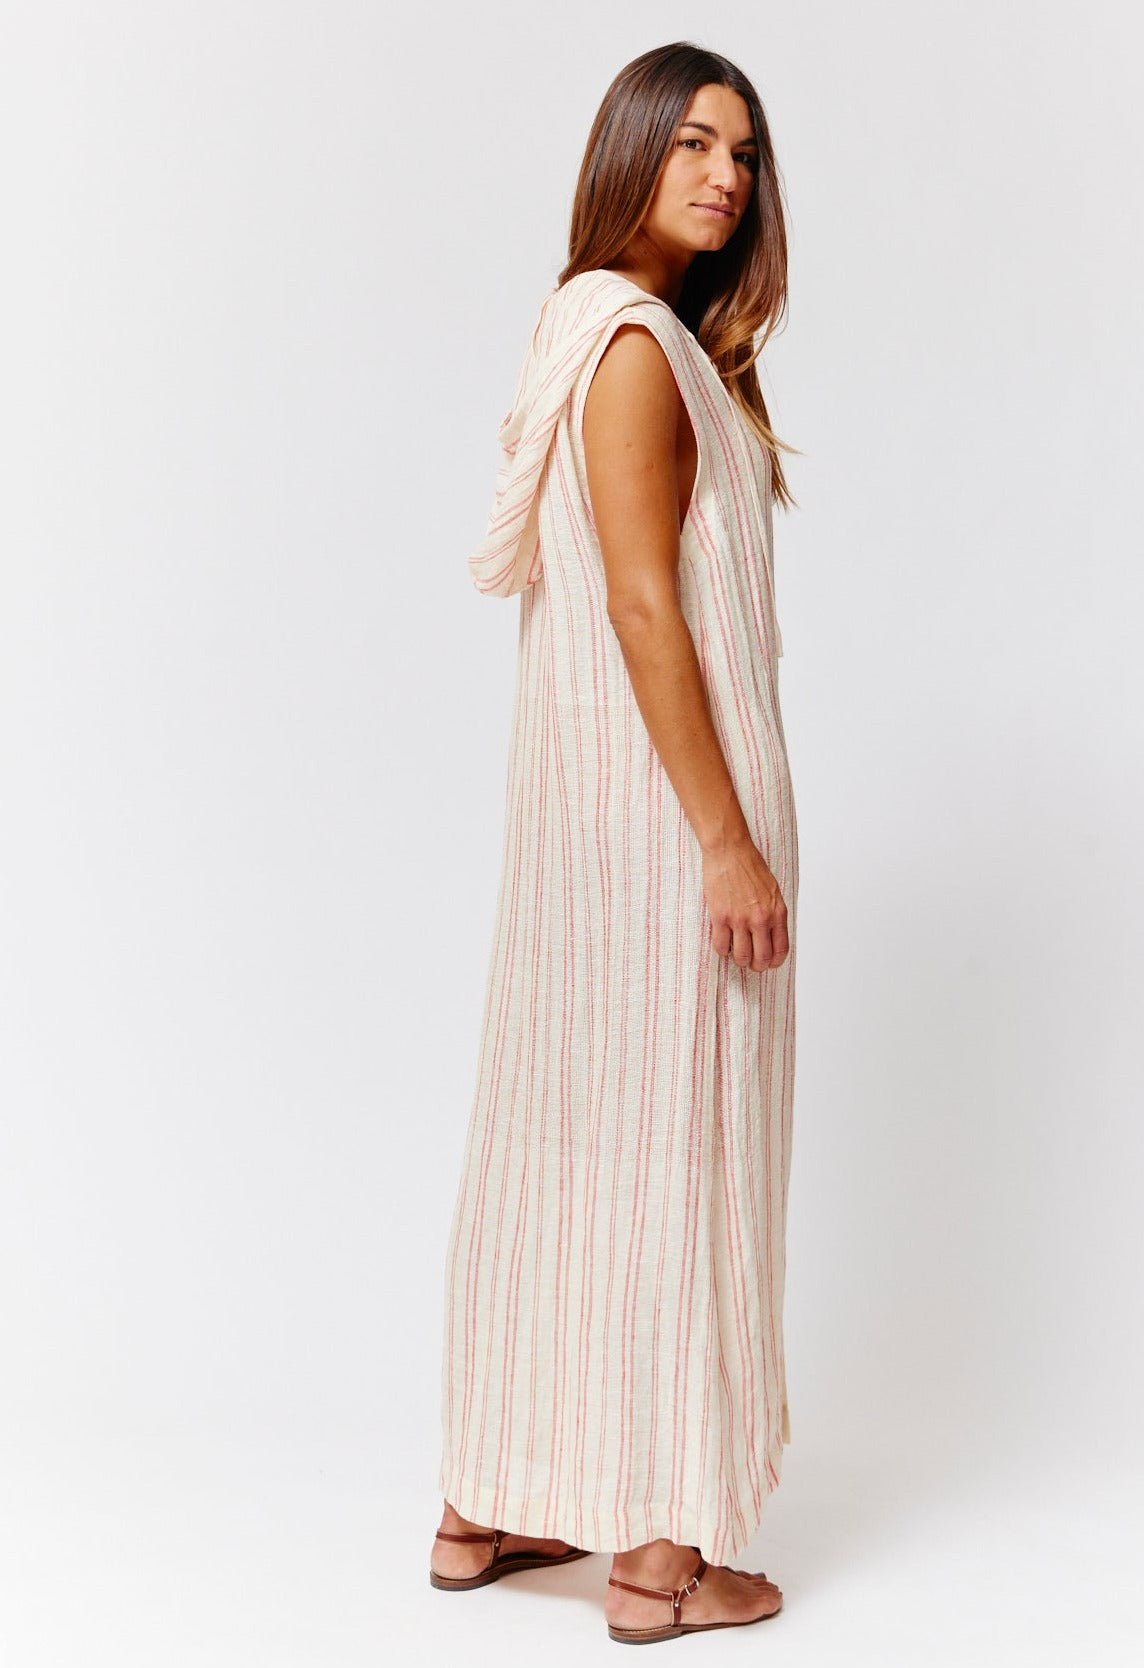 THE CAFTAN SHIRT DRESS in NATURAL & TOMATO CHIOS STRIPED GAUZE